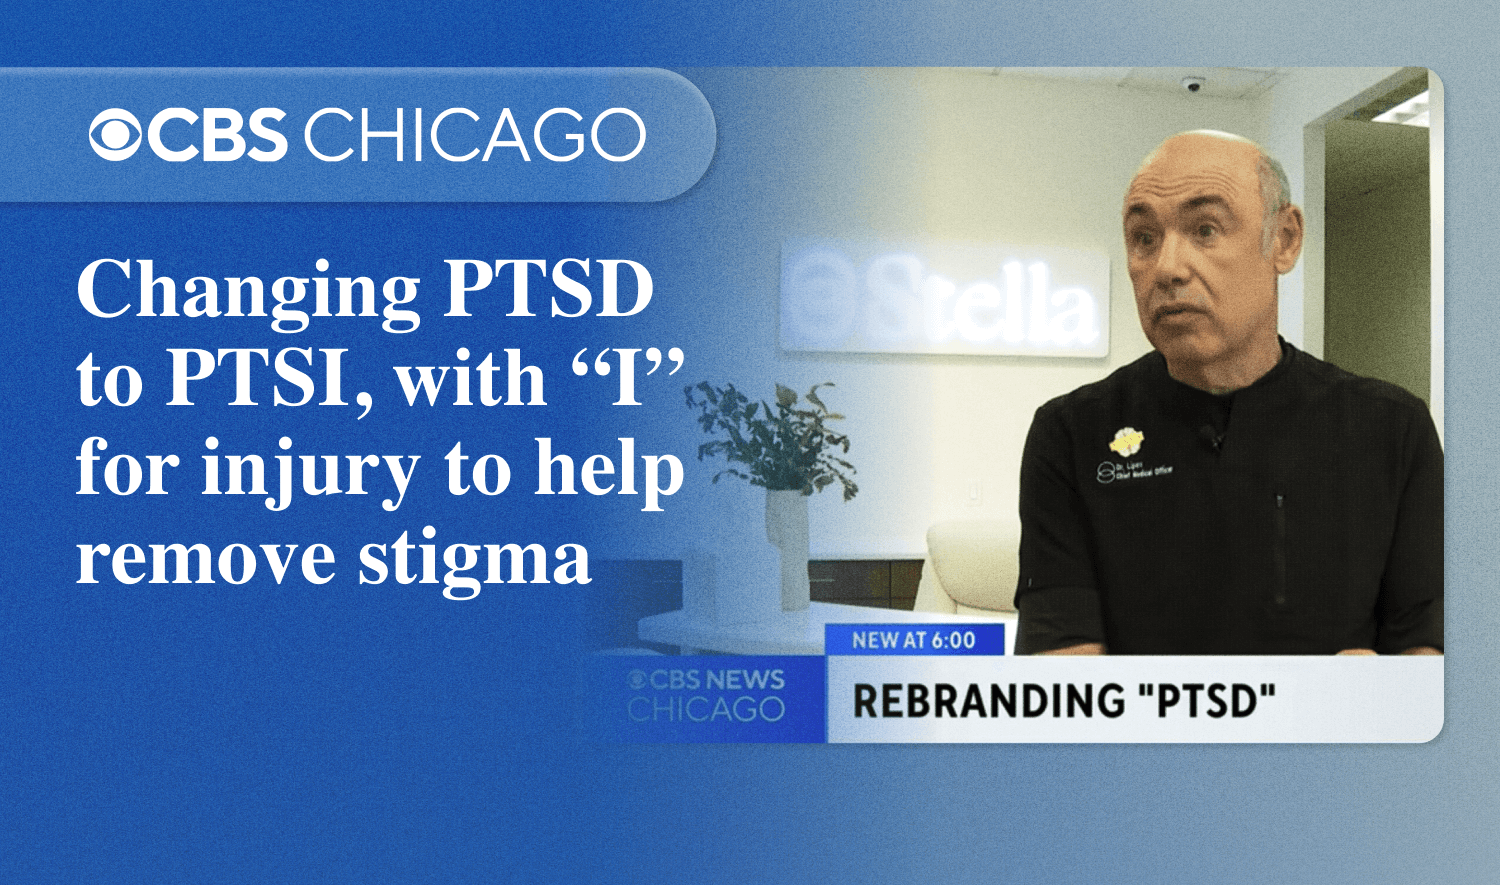 An advertisement for CBS Chicago shows Dr. Lipov talking about PTSD and PTSI